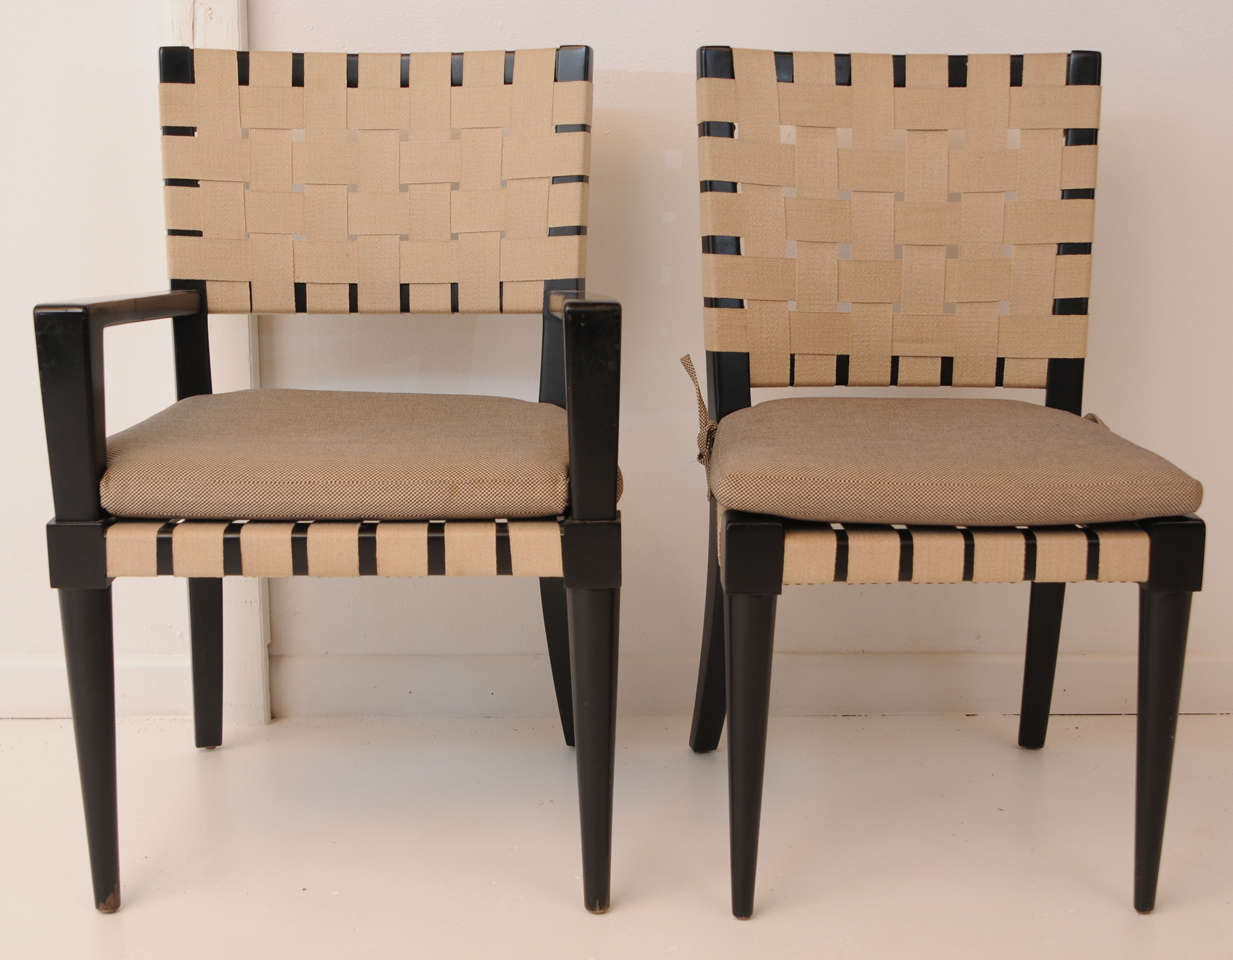 Set of 8 1980's chairs (2 arm chairs & 6 side chairs) designed by Vincente Wolf for Niedermaier.  Wenge wood with light tan webbing and brass nail heads.  Side chairs measure 35 in. H (back) x 16.5 H (seat without cushions) 19.5 in. L x 18 in. D.